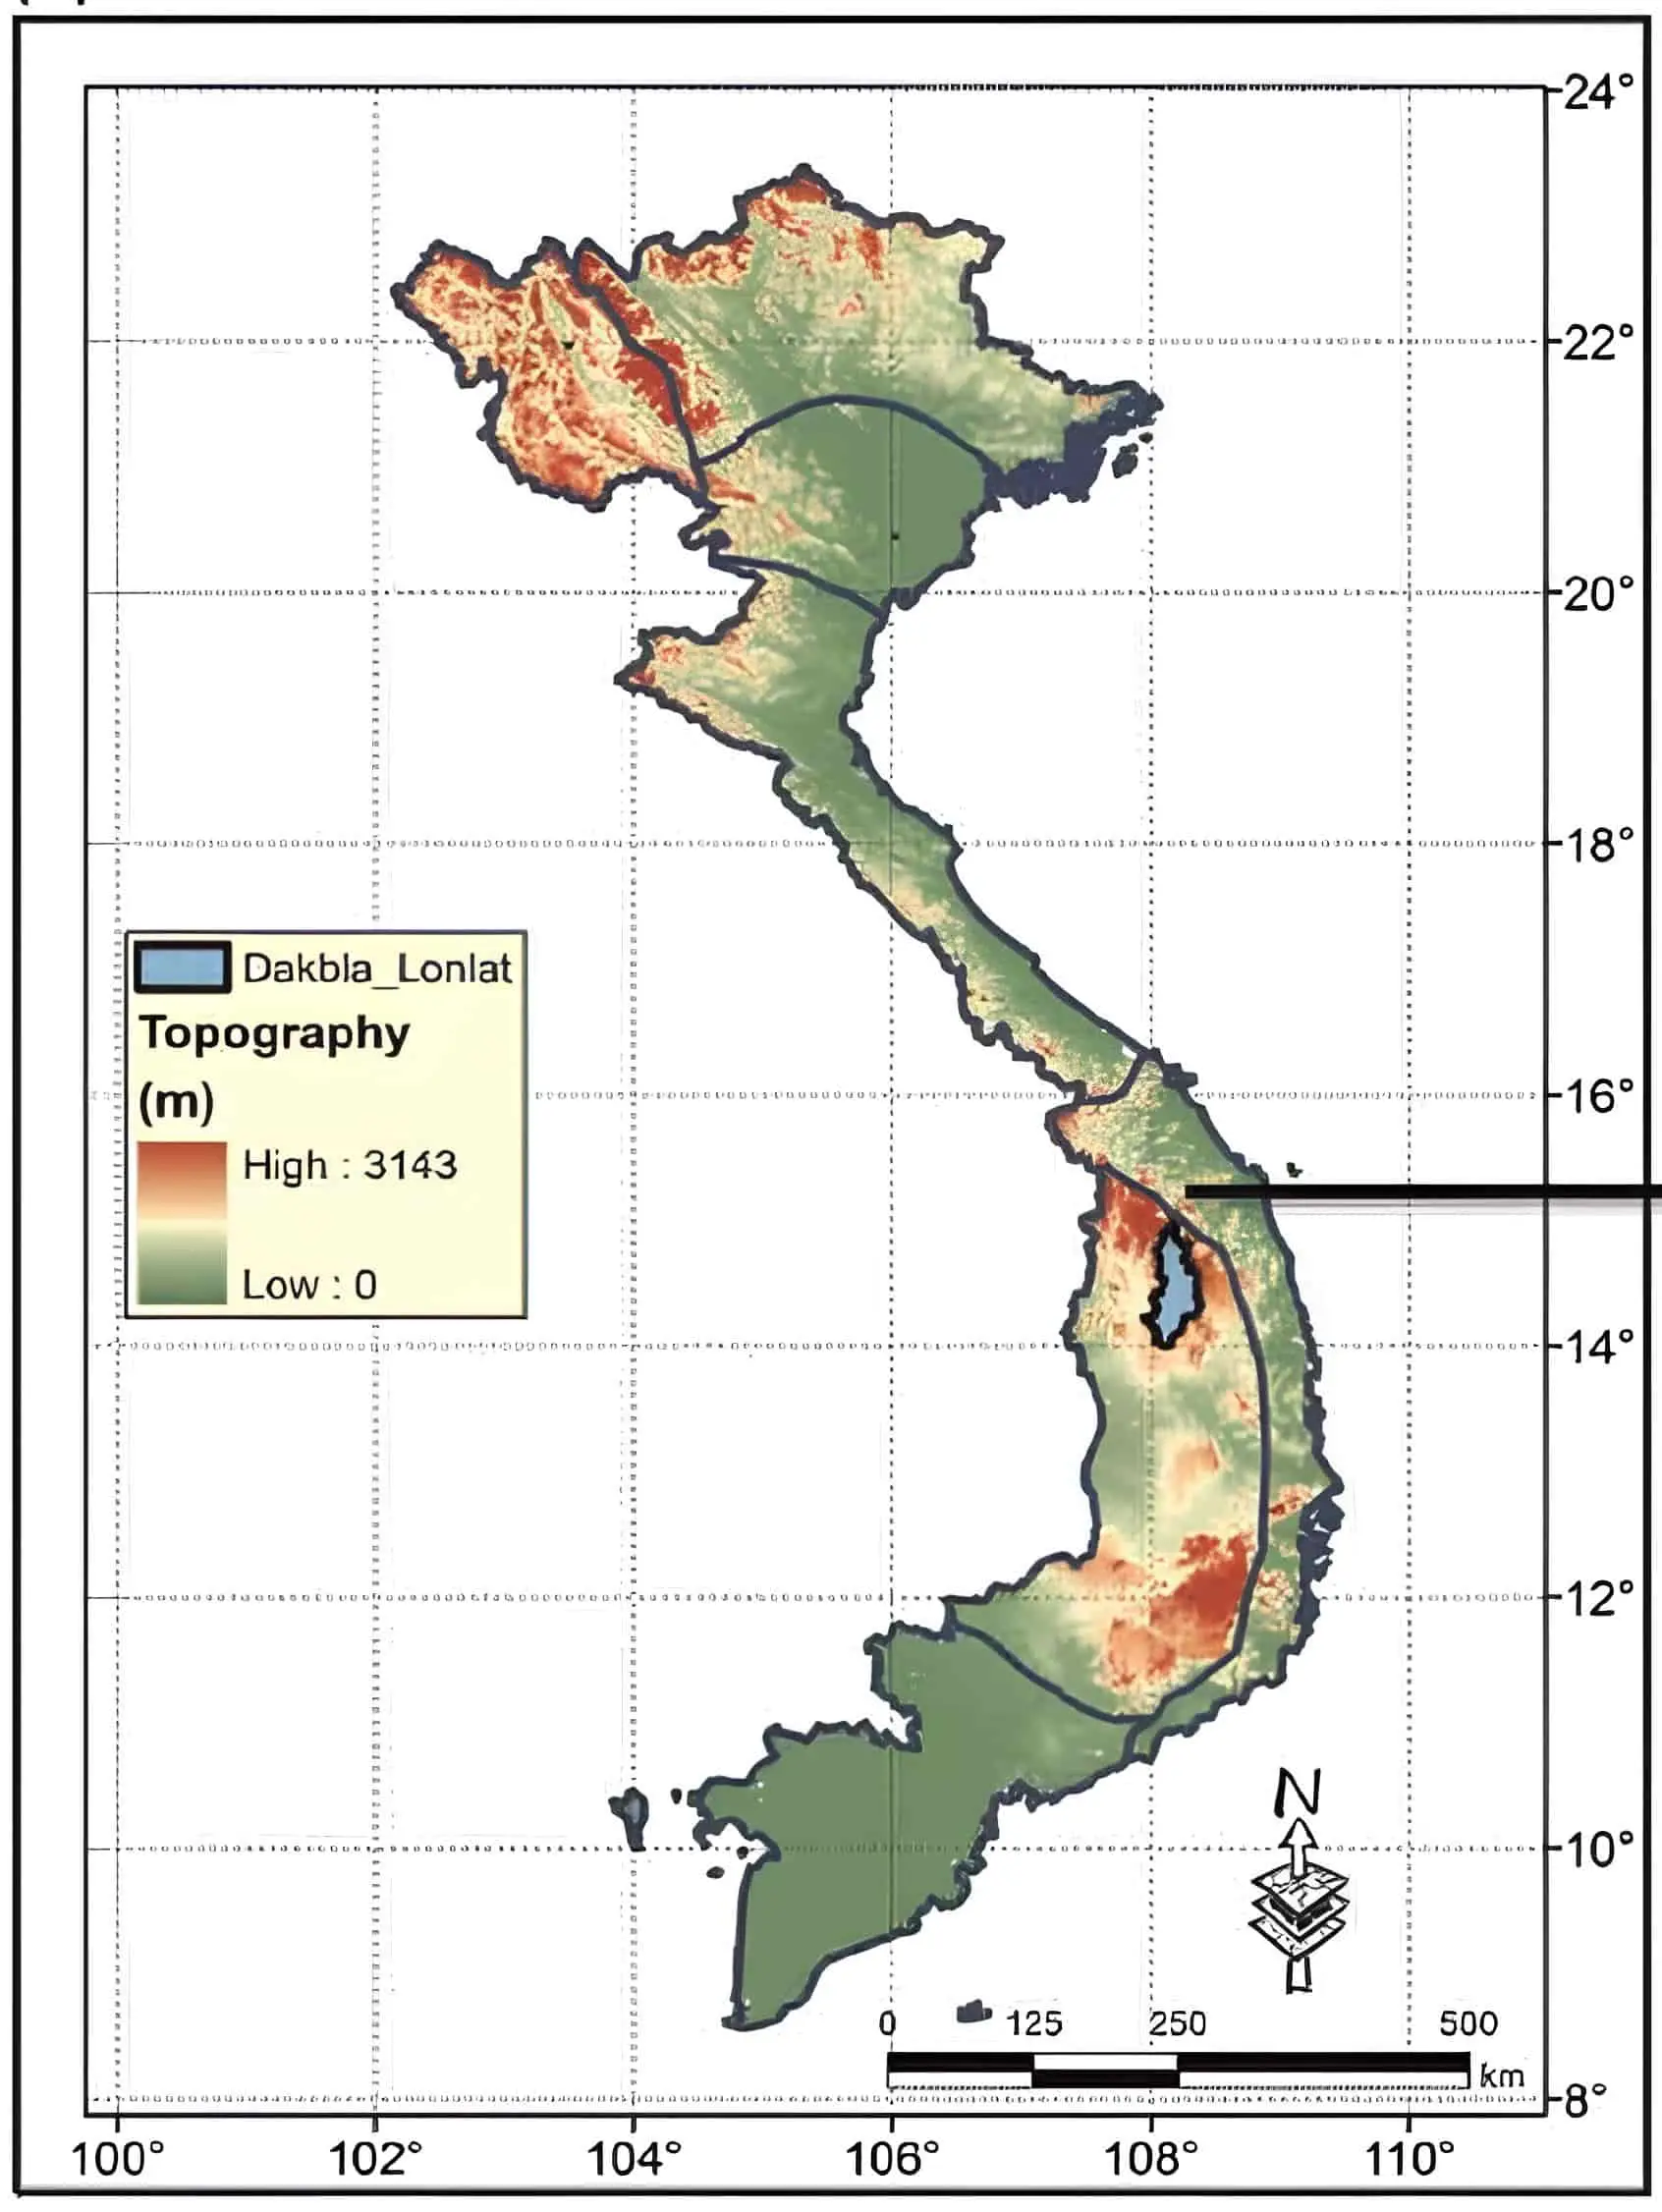 A map of Vietnam showing the climate zones and average temperatures in September